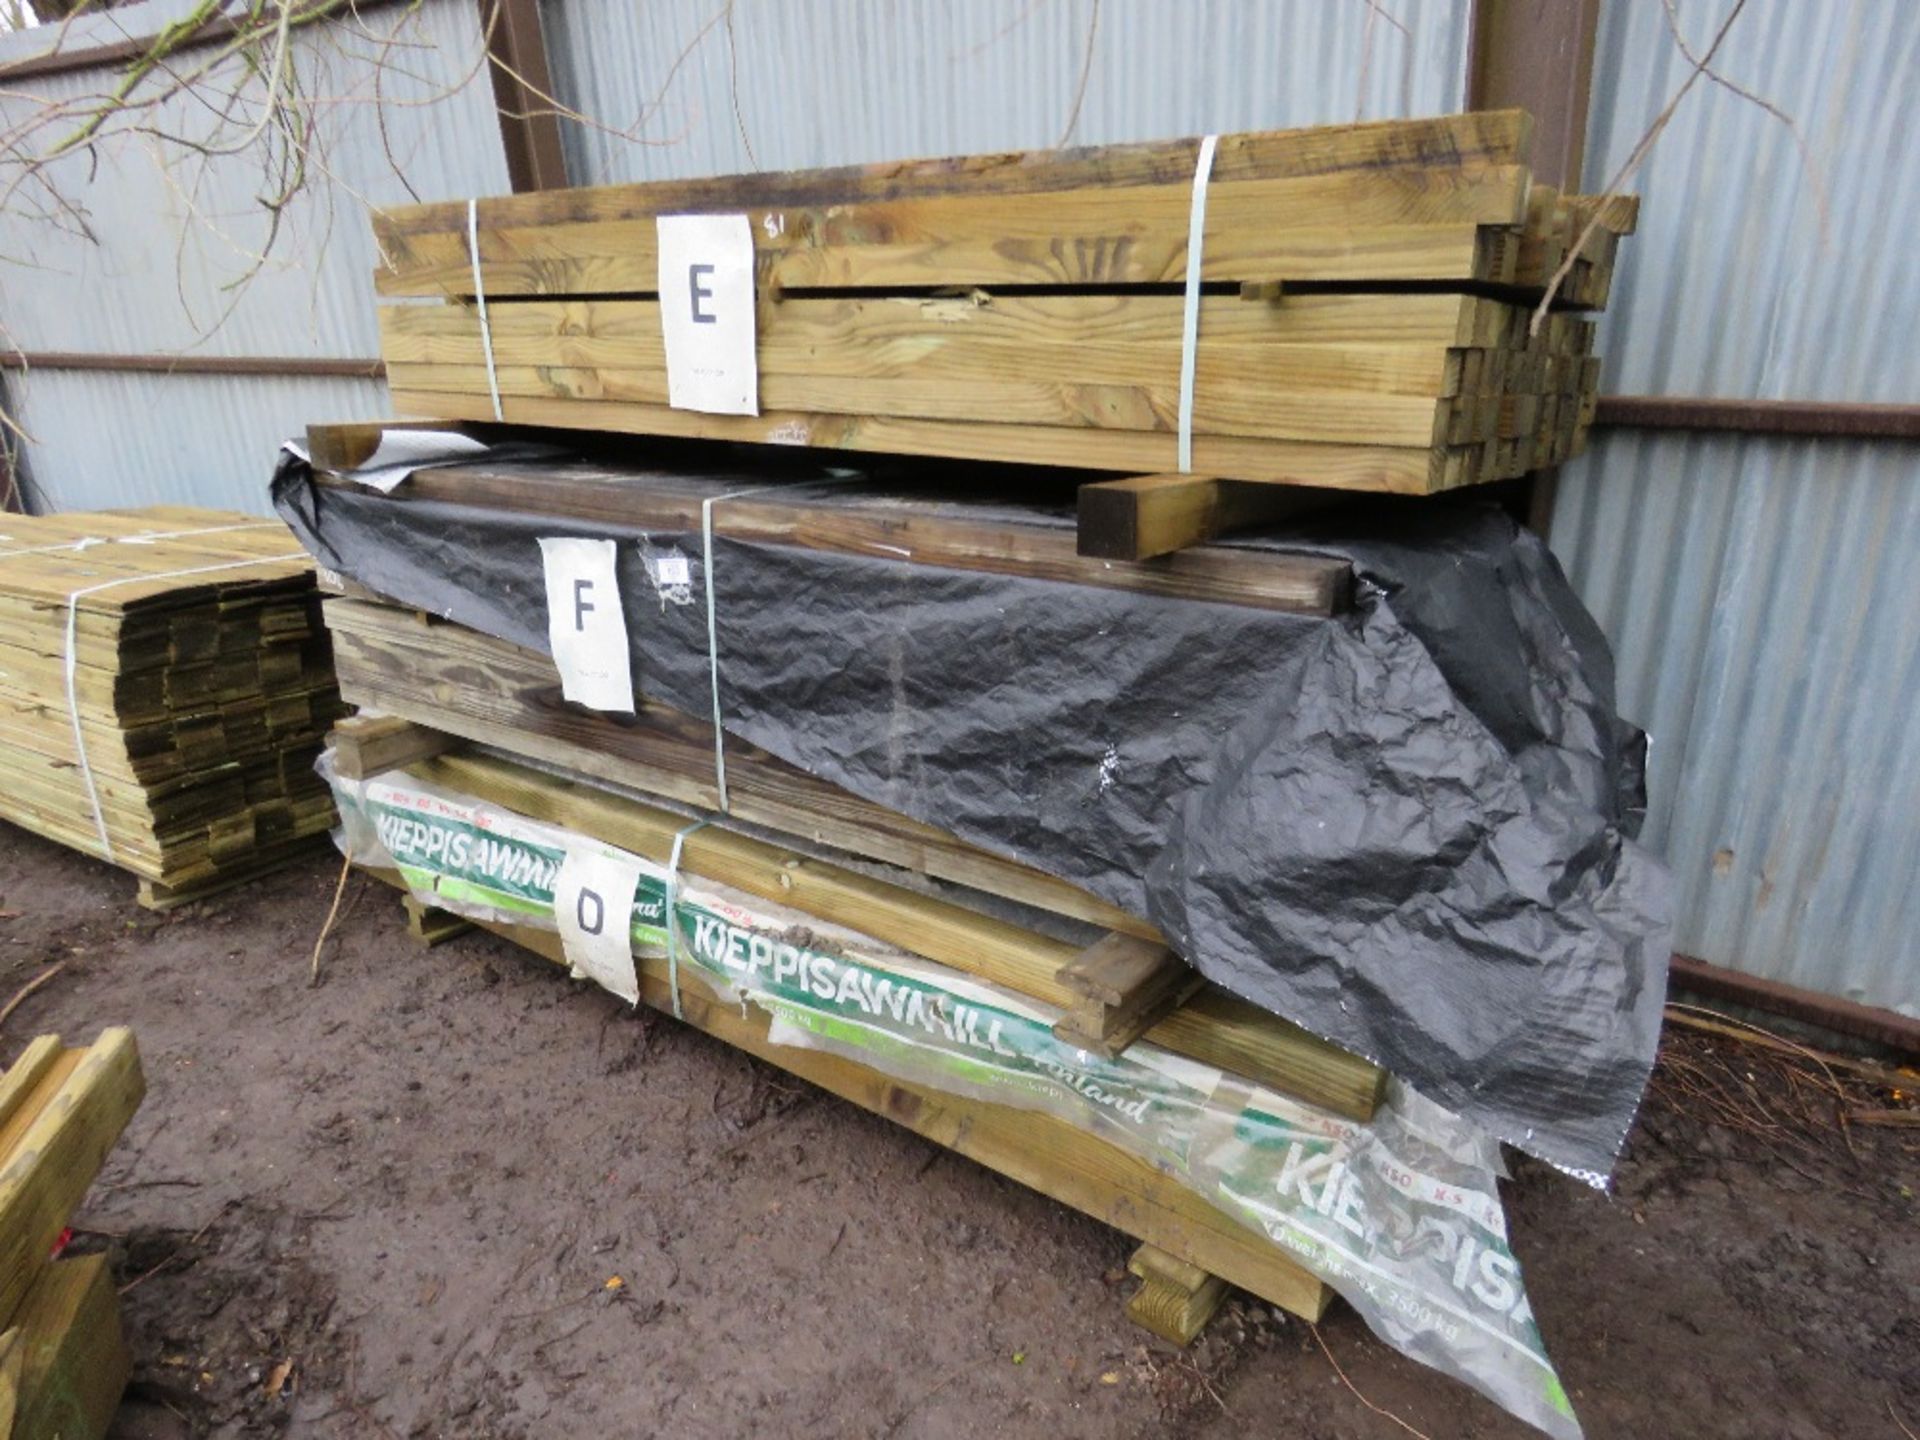 LARGE STACK OF ASSORTED TIMBER POSTS 81NO. APPROX. 2.1MX5.5CMX8CM 106NO. APPROX. 2.1MX7CMX6CM